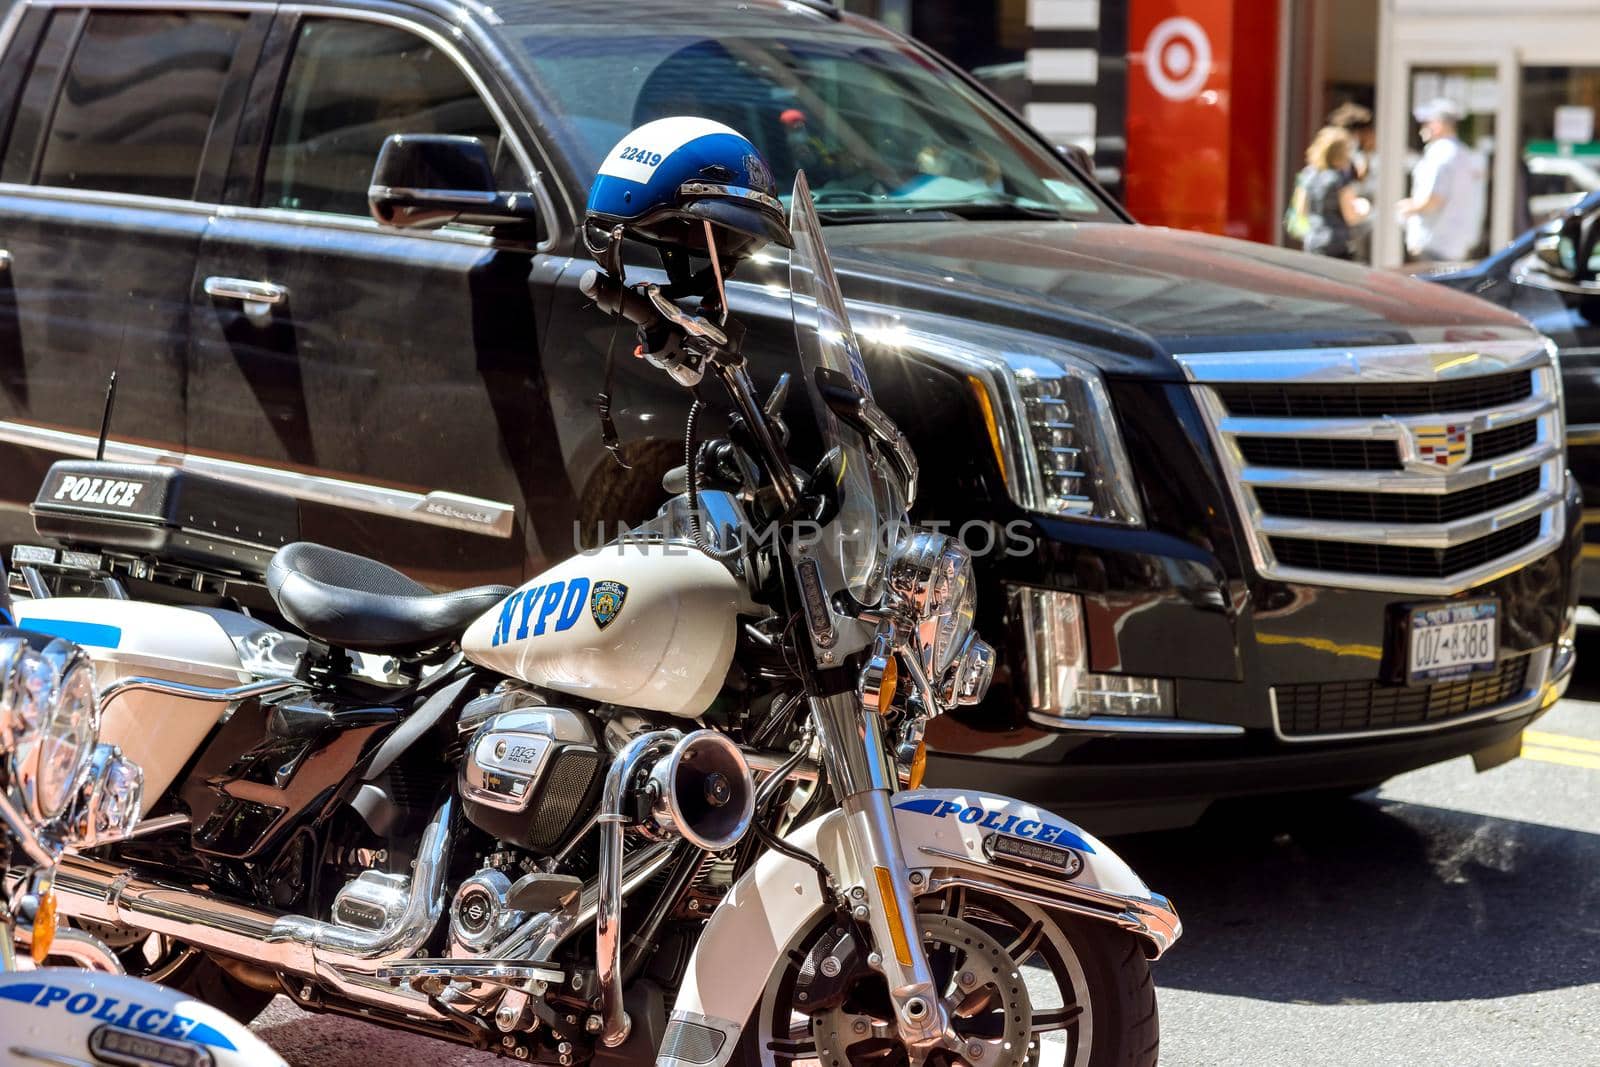 Motorcycles helmet on motorcycles with police New York City by ungvar